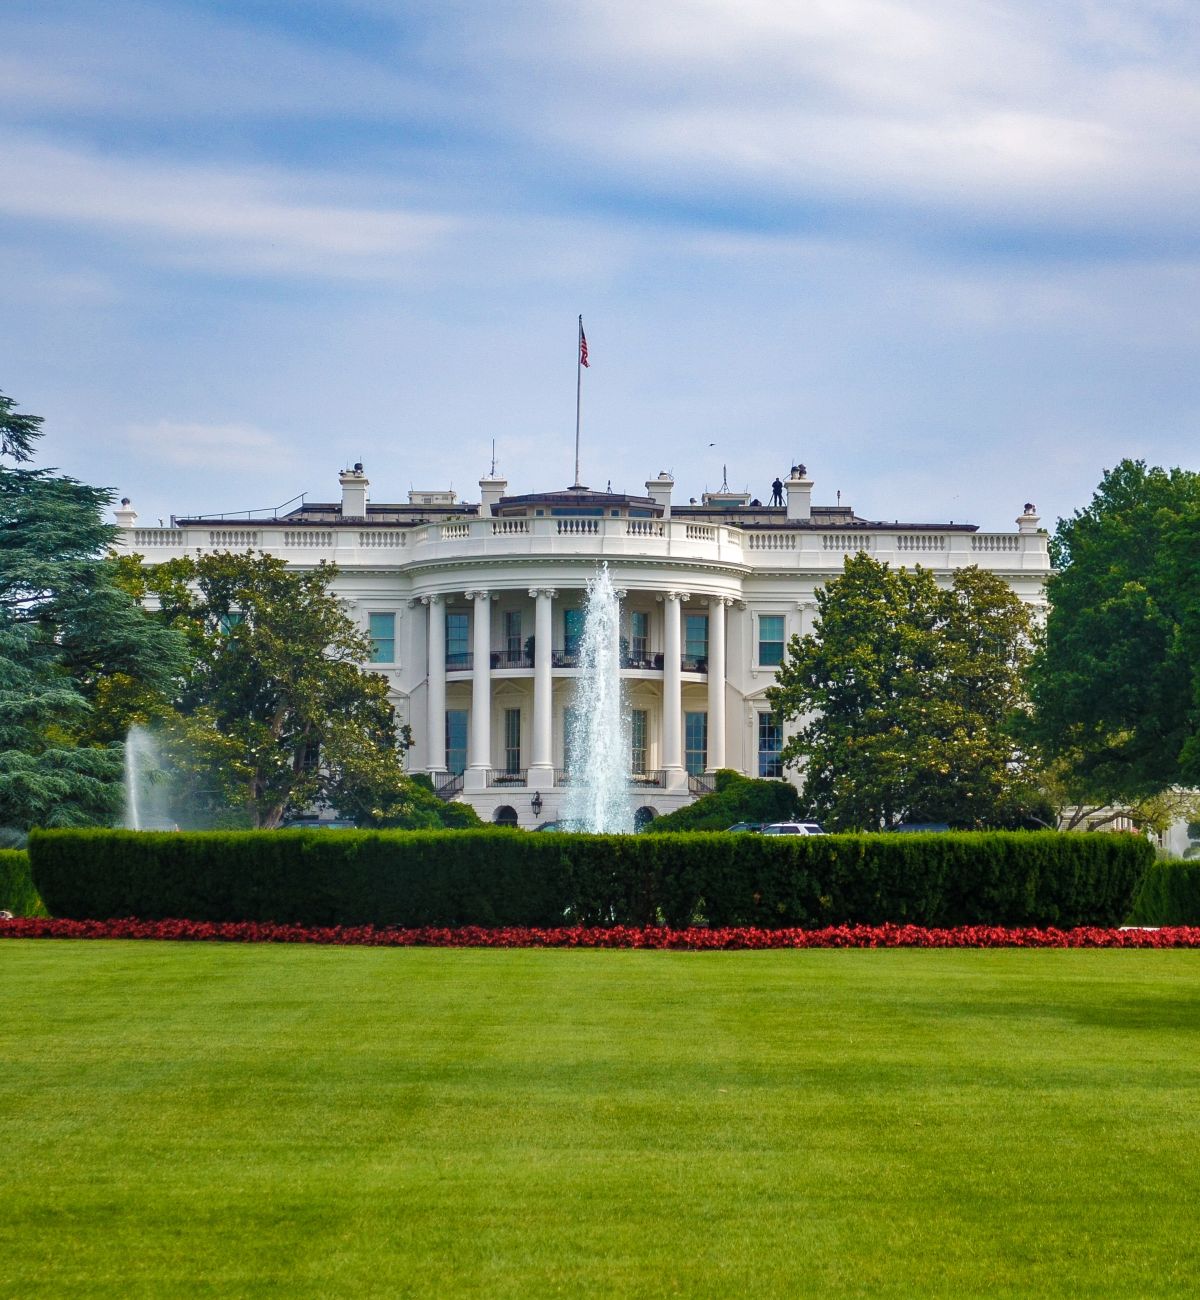 A Large Green Field With Trees In The Background With White House In The Background